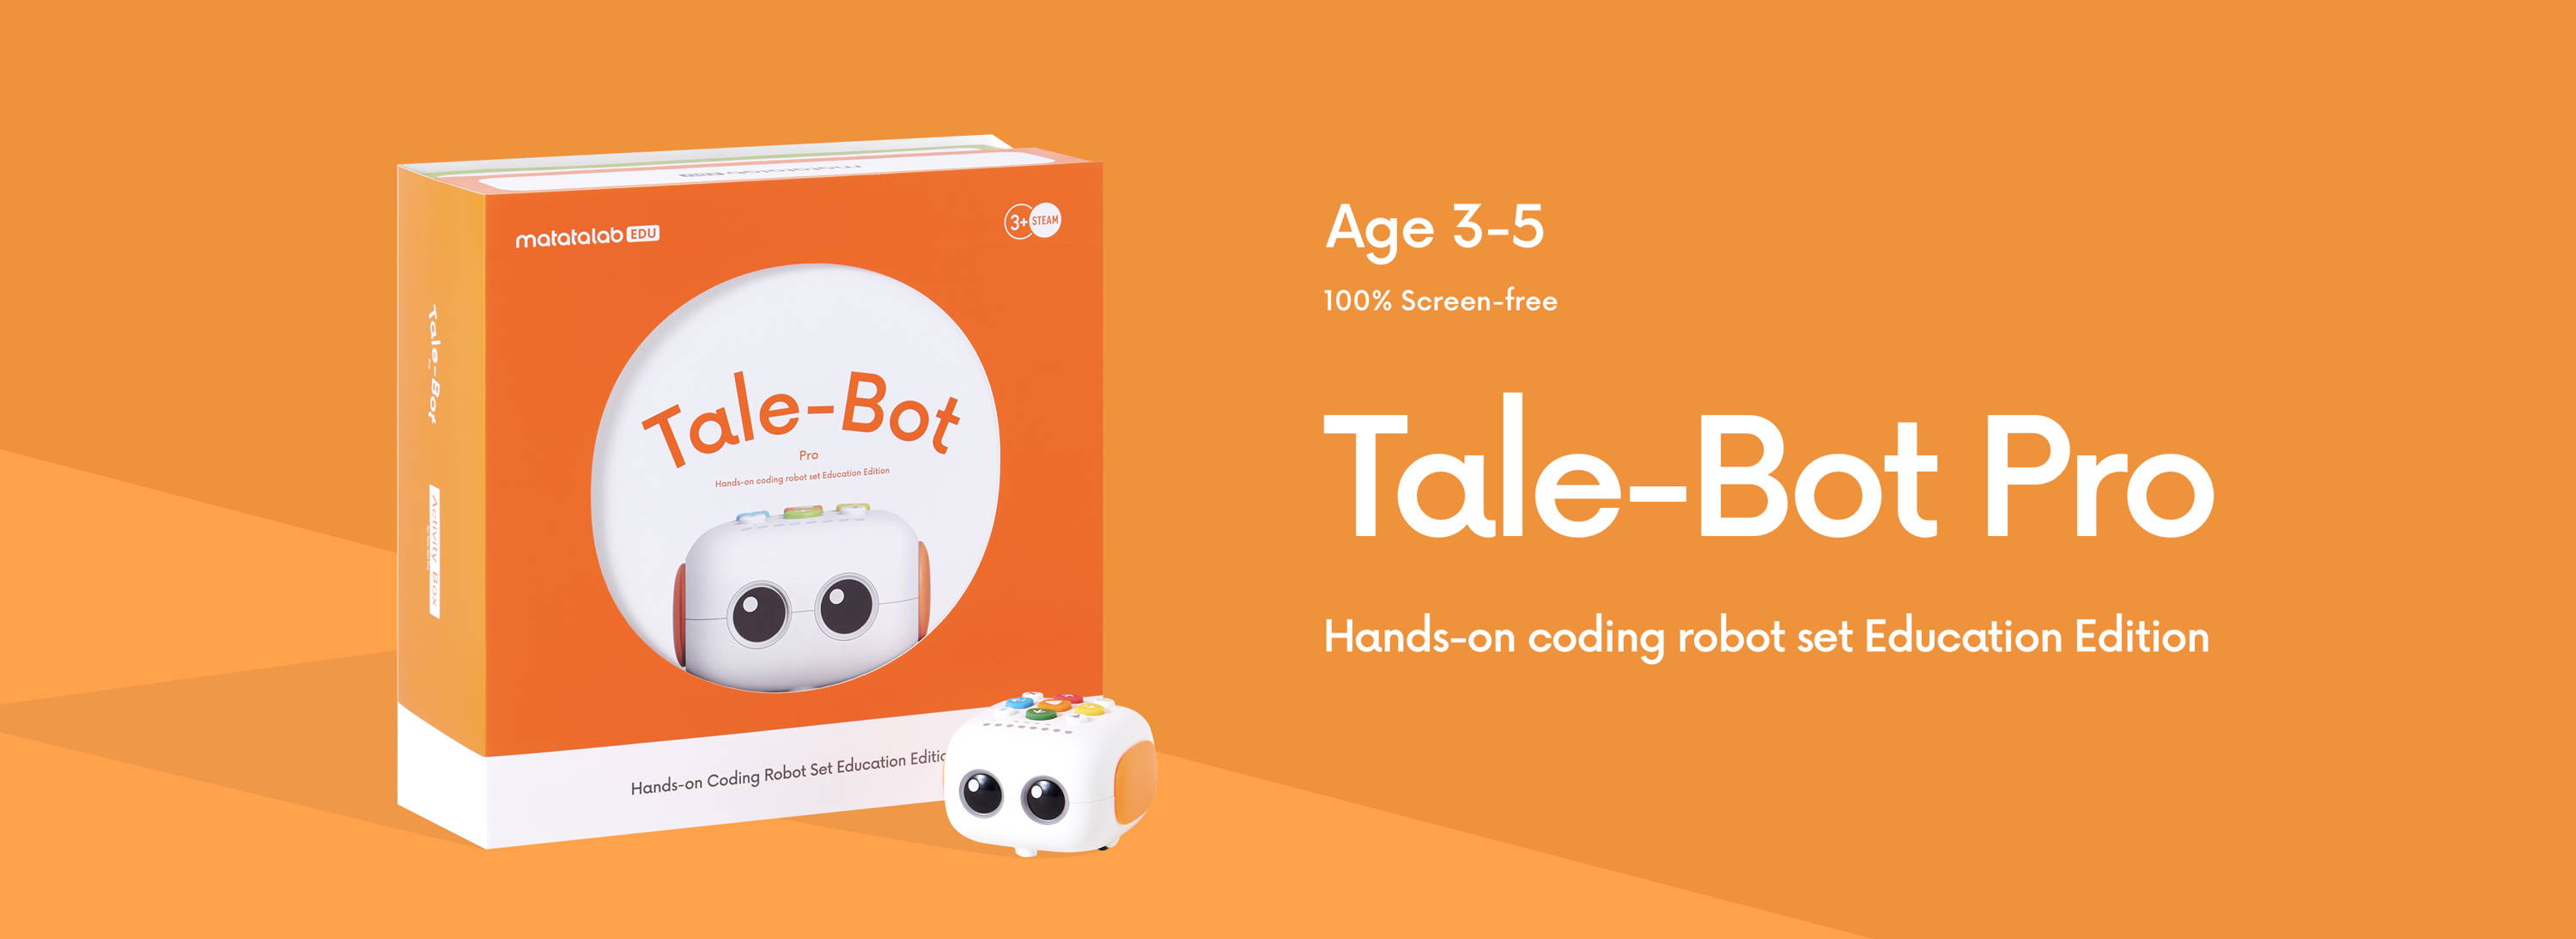 Matatalab TaleBot Pro Coding Robot for Kids Ages 3-5, Educational Learning Toys with Programmable App & Commands Buttons, Interactive Stem Toys for